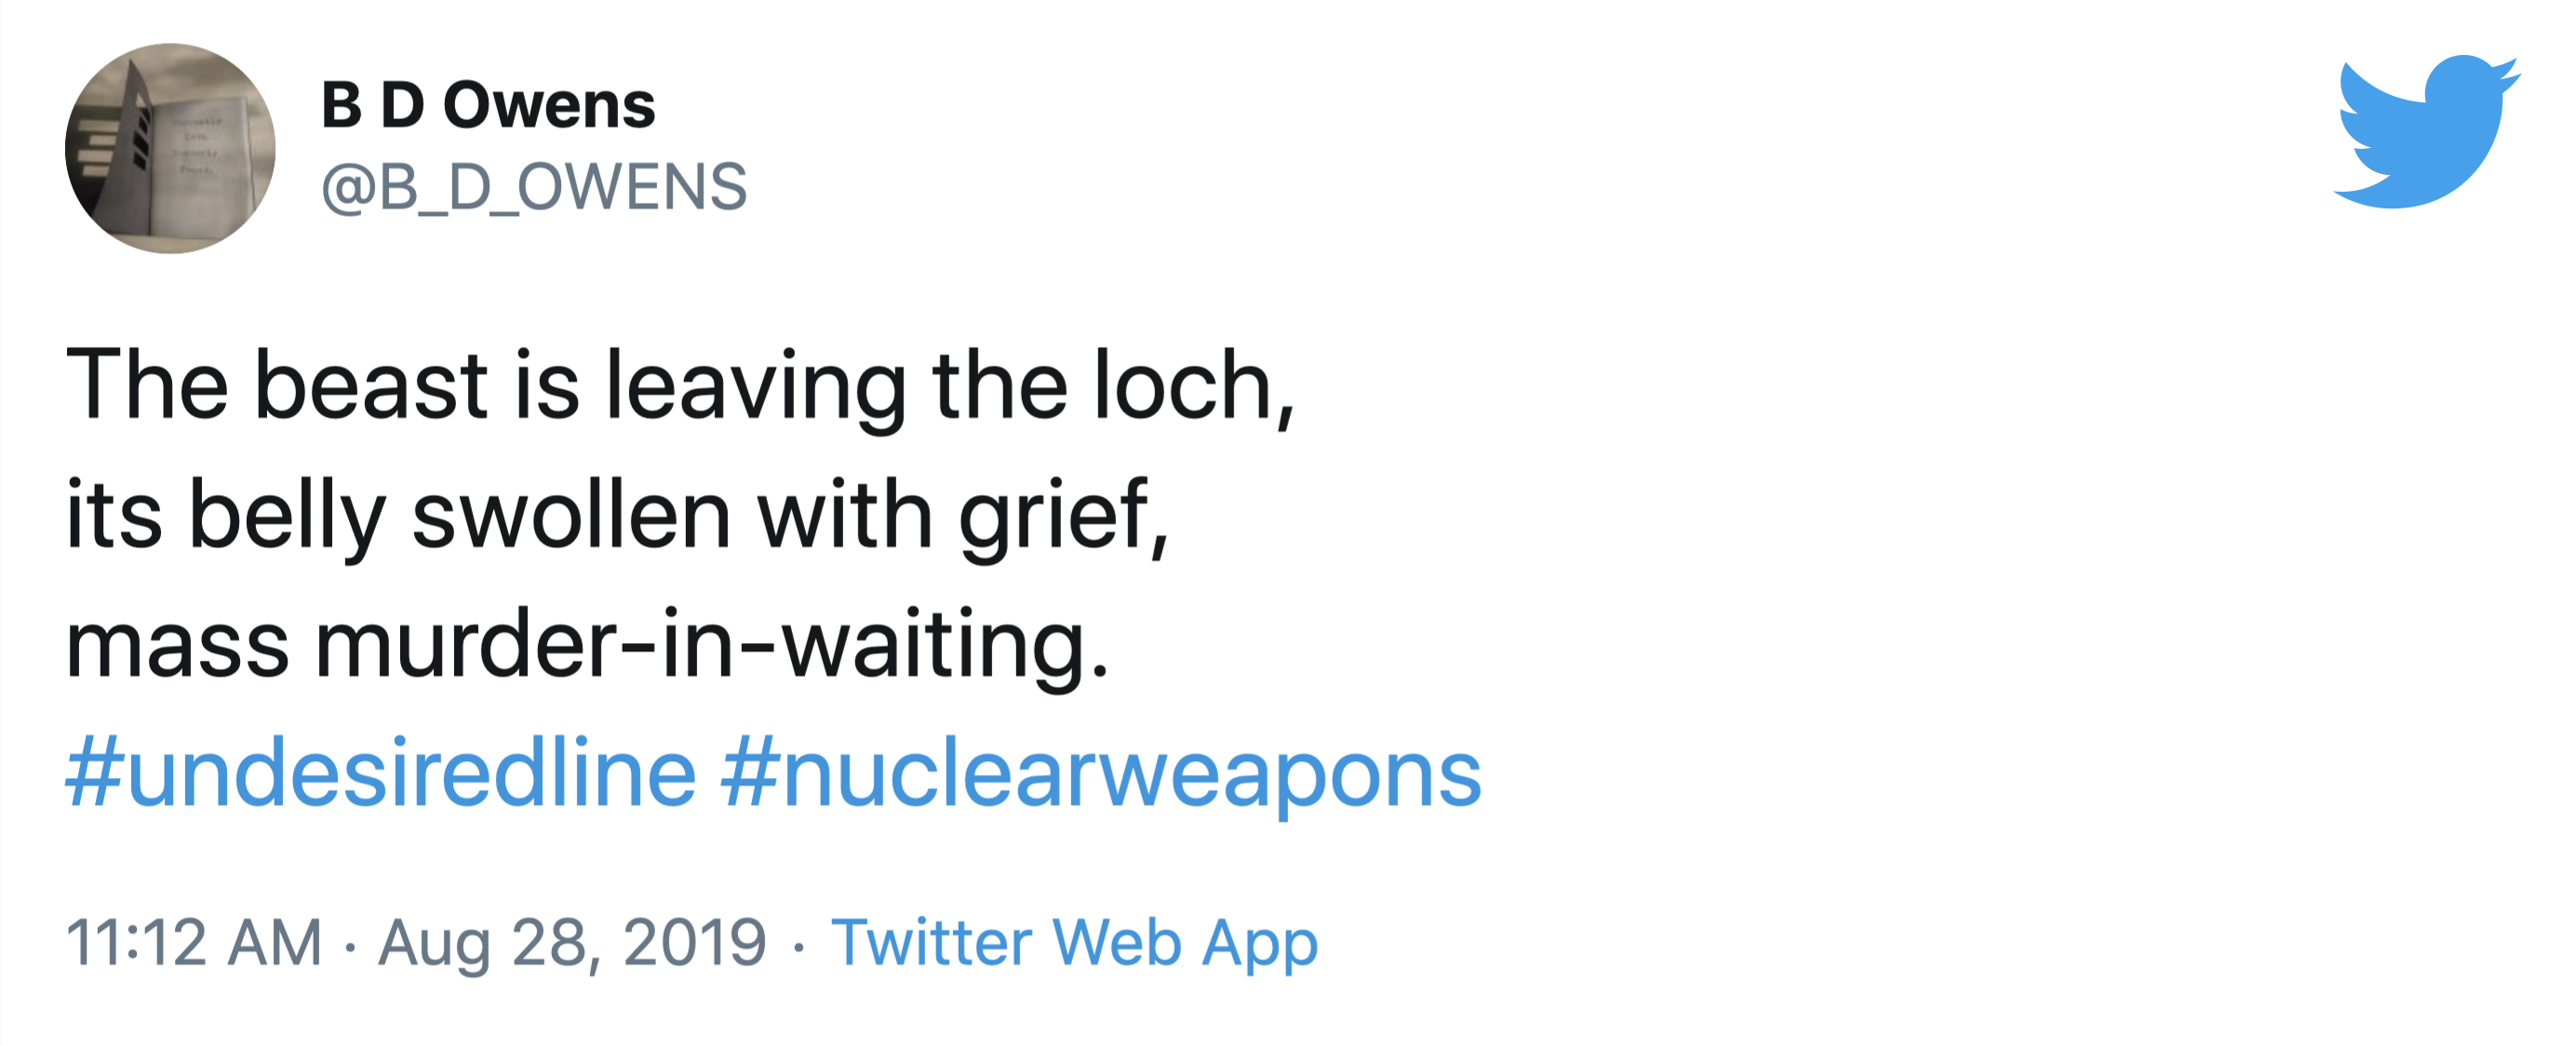 A tweet from BD Owens that reads; " The beast is leaving the loch, its belly swollen with grief, mass murder-in-waiting. #undesiredline #nuclearweapons